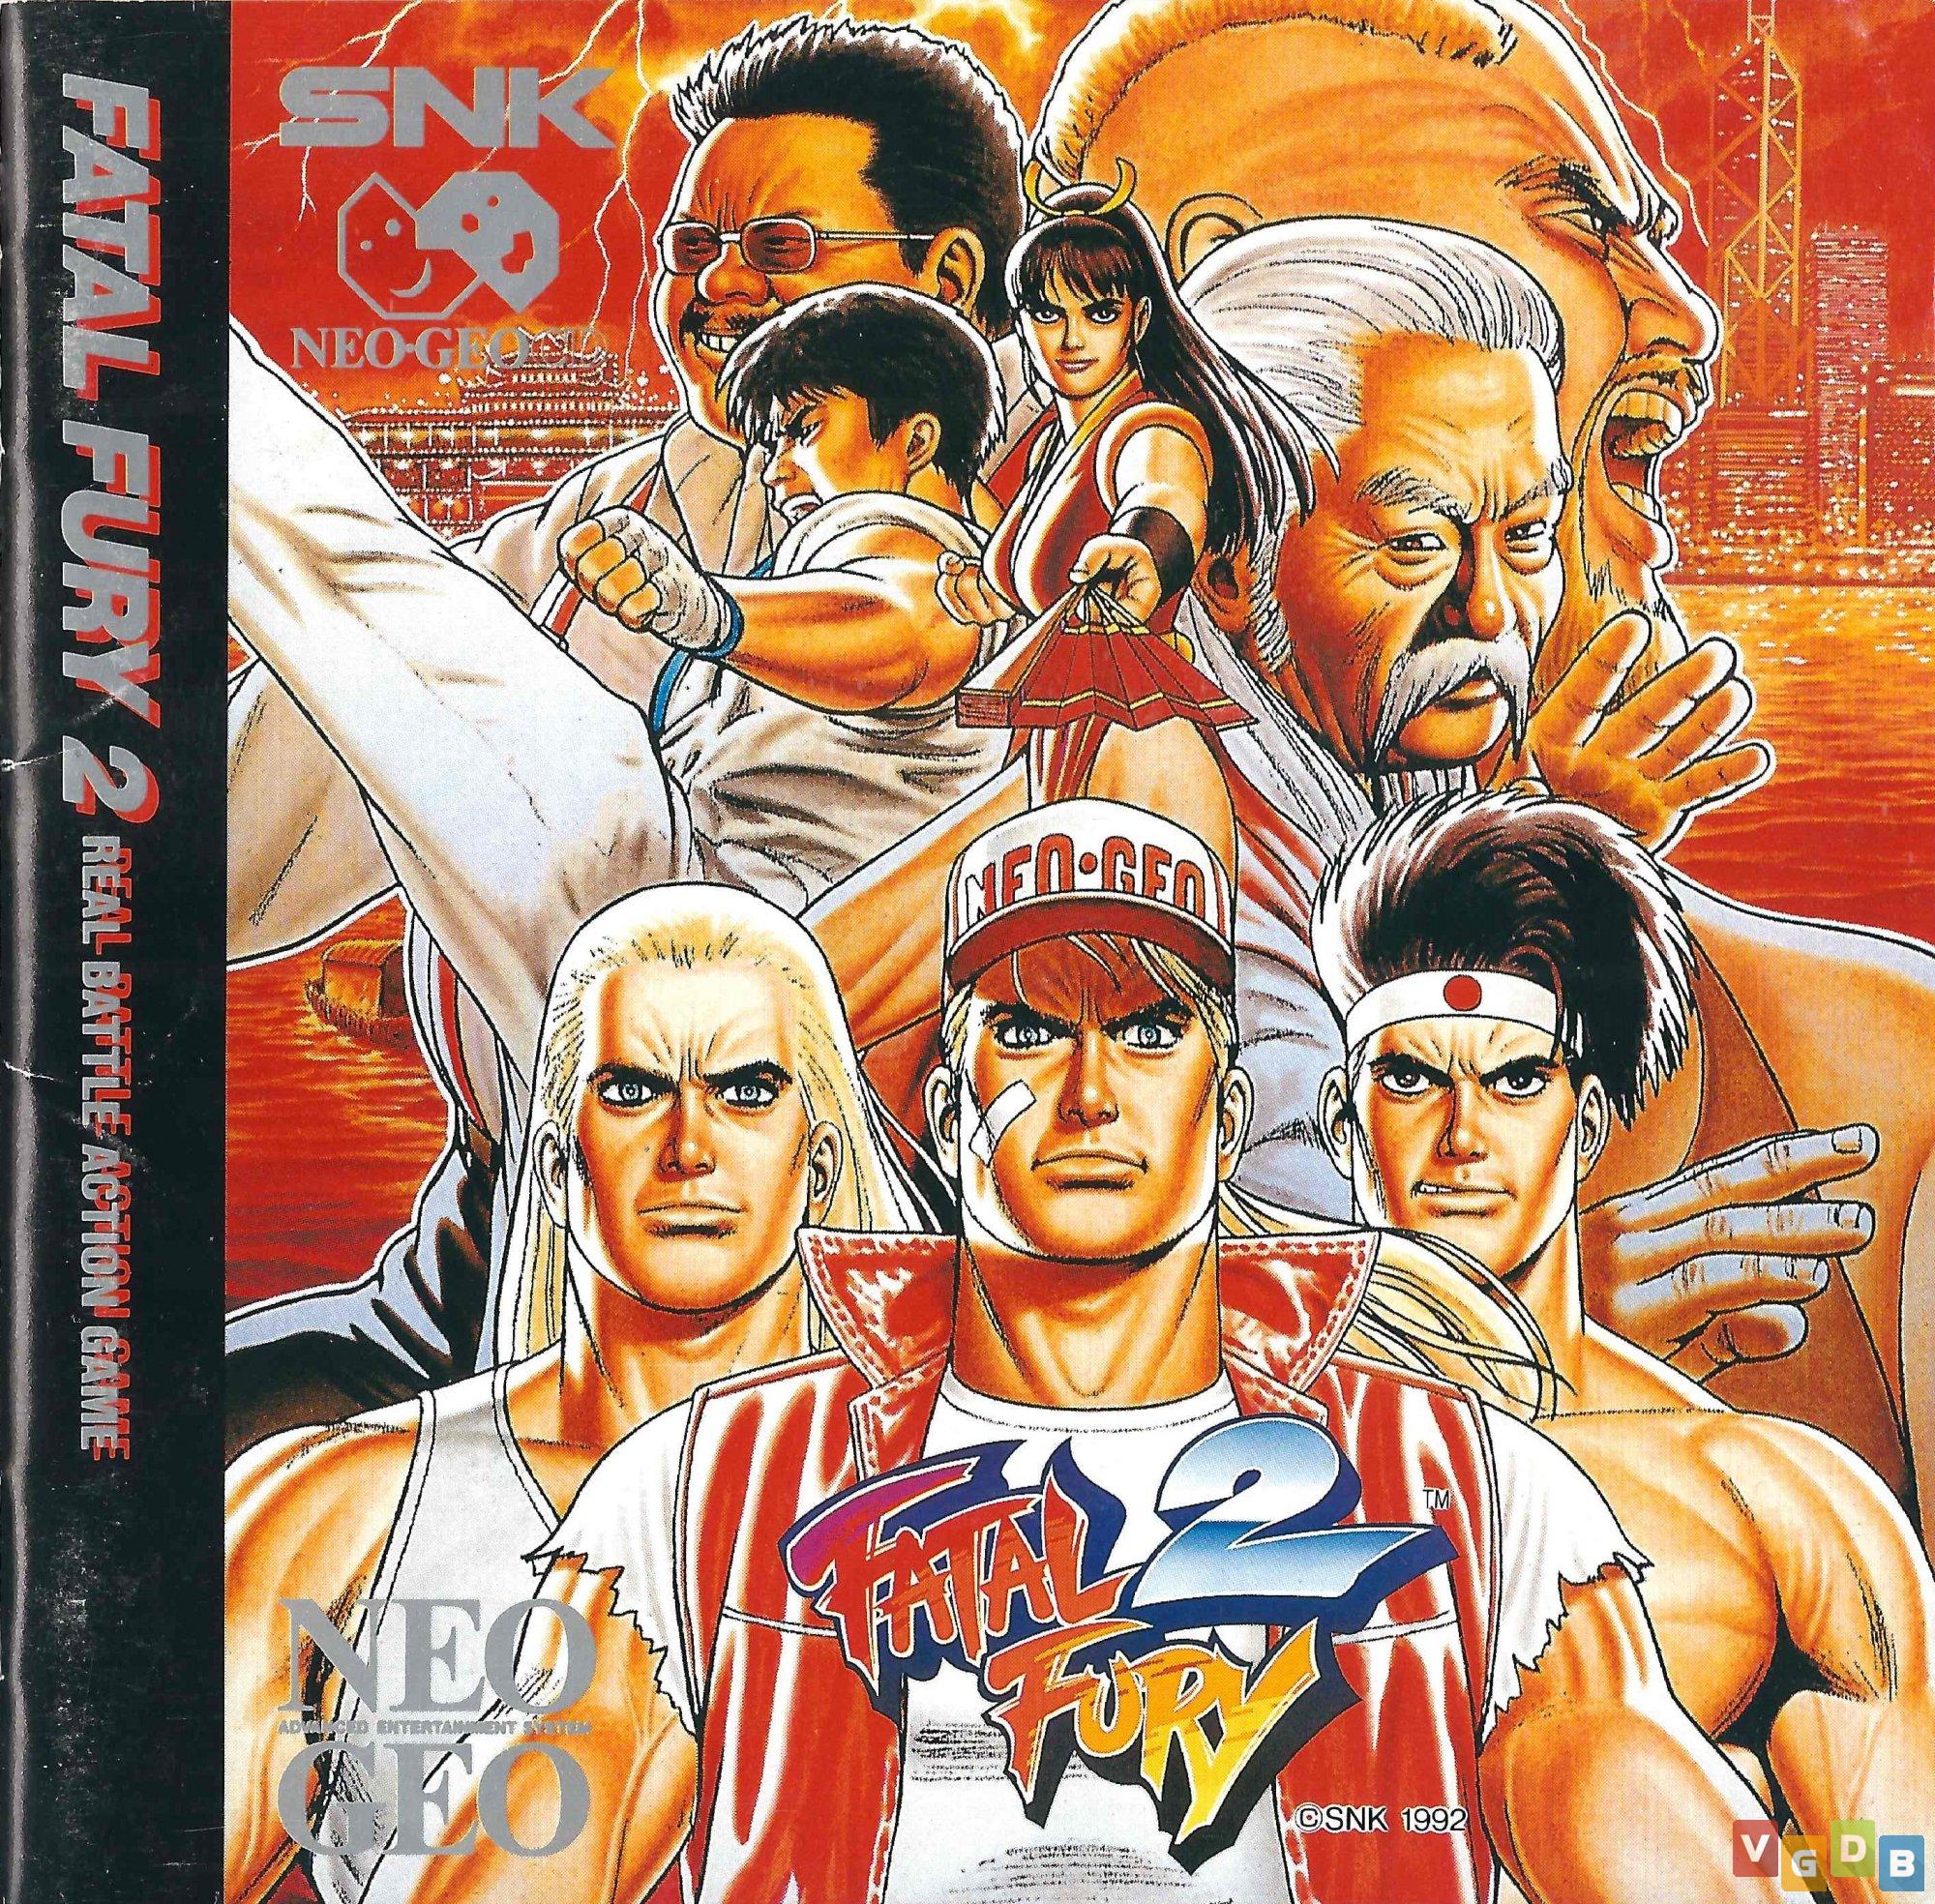 Play Genesis Fatal Fury 2 (USA) Online in your browser 